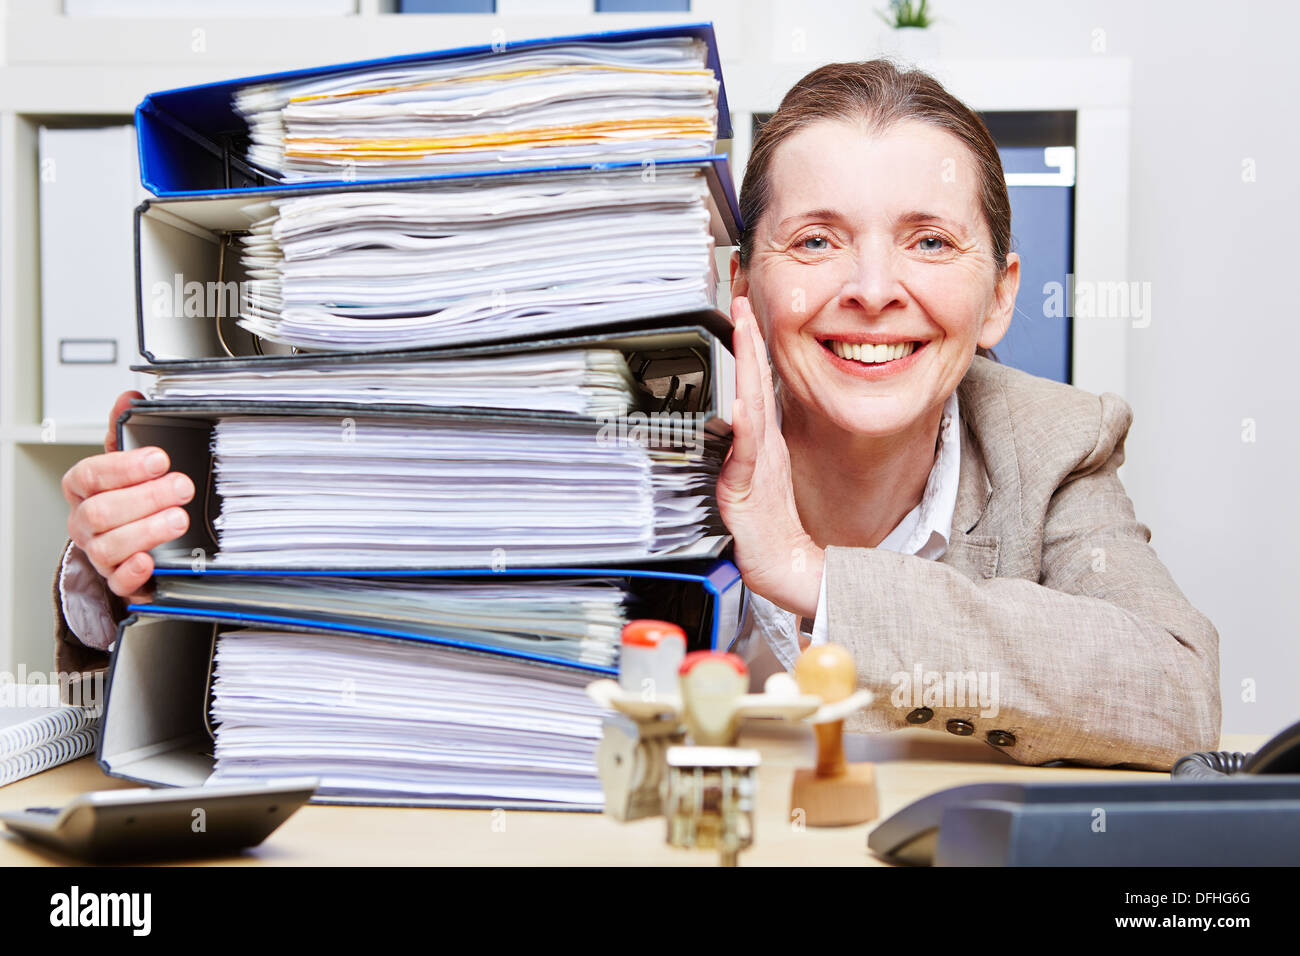 Happy business woman in office with a stack of files Stock Photo